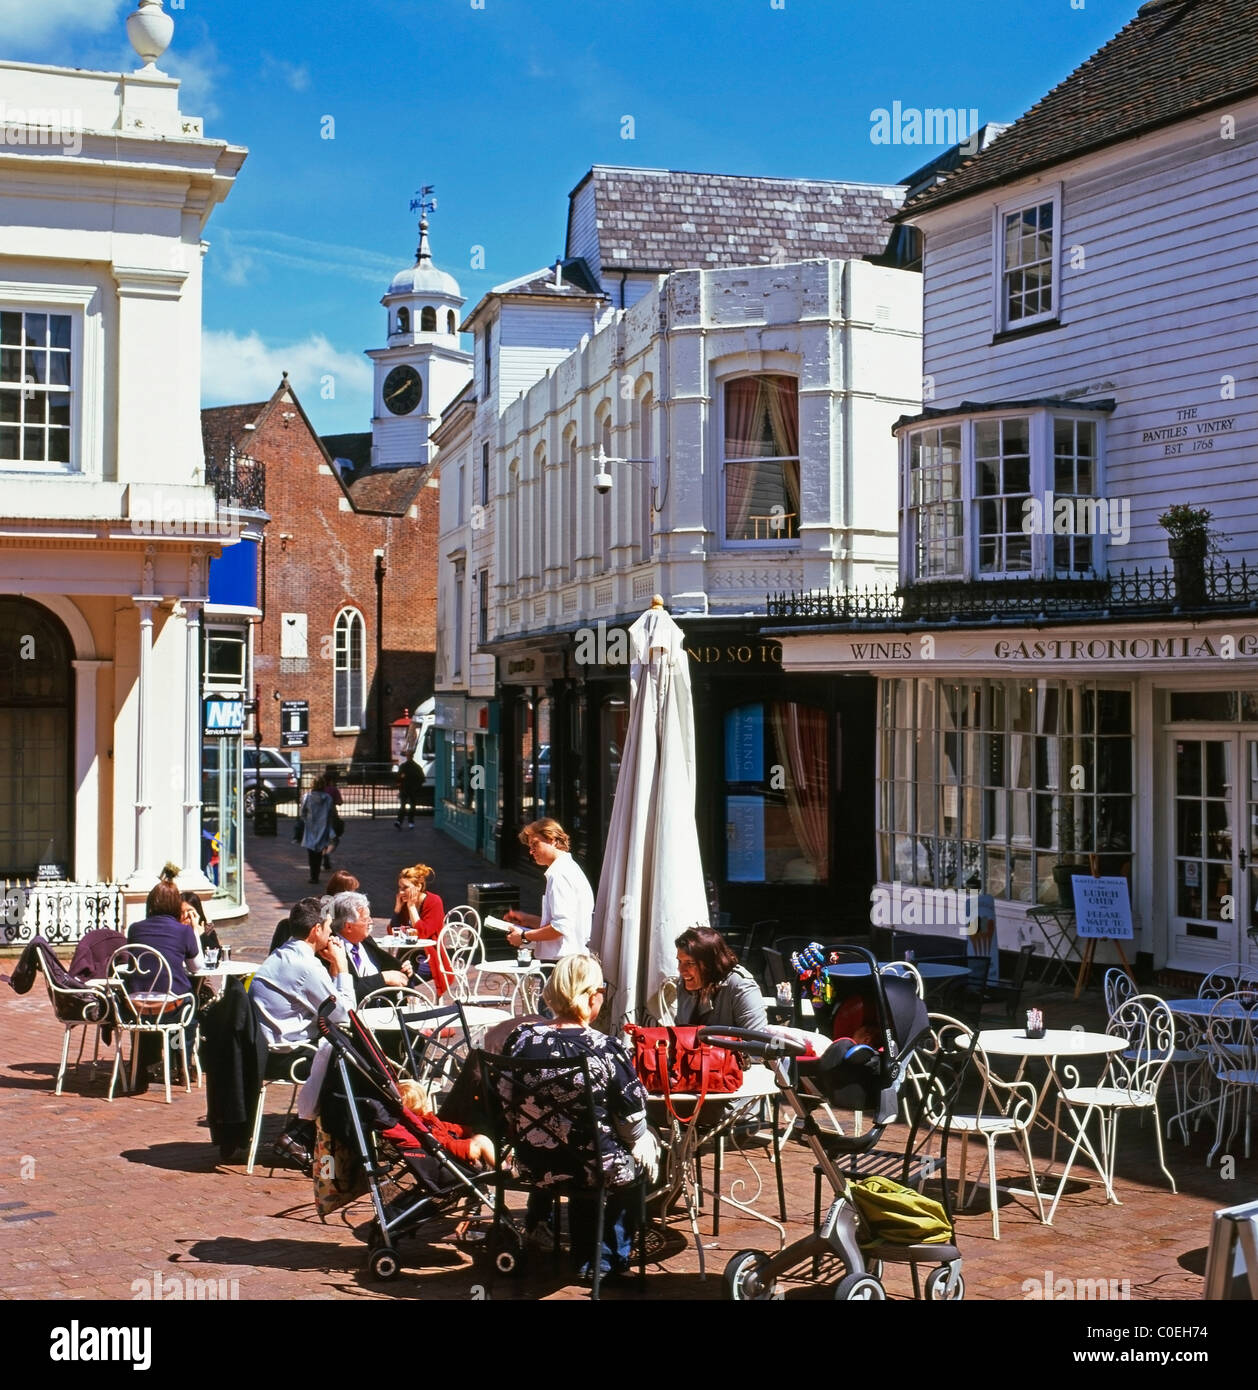 People sitting at outside tables at lunchtime Gastronomia restaurant Pantiles Vintry in Royal Tunbridge Wells, Kent England UK   KATHY DEWITT Stock Photo